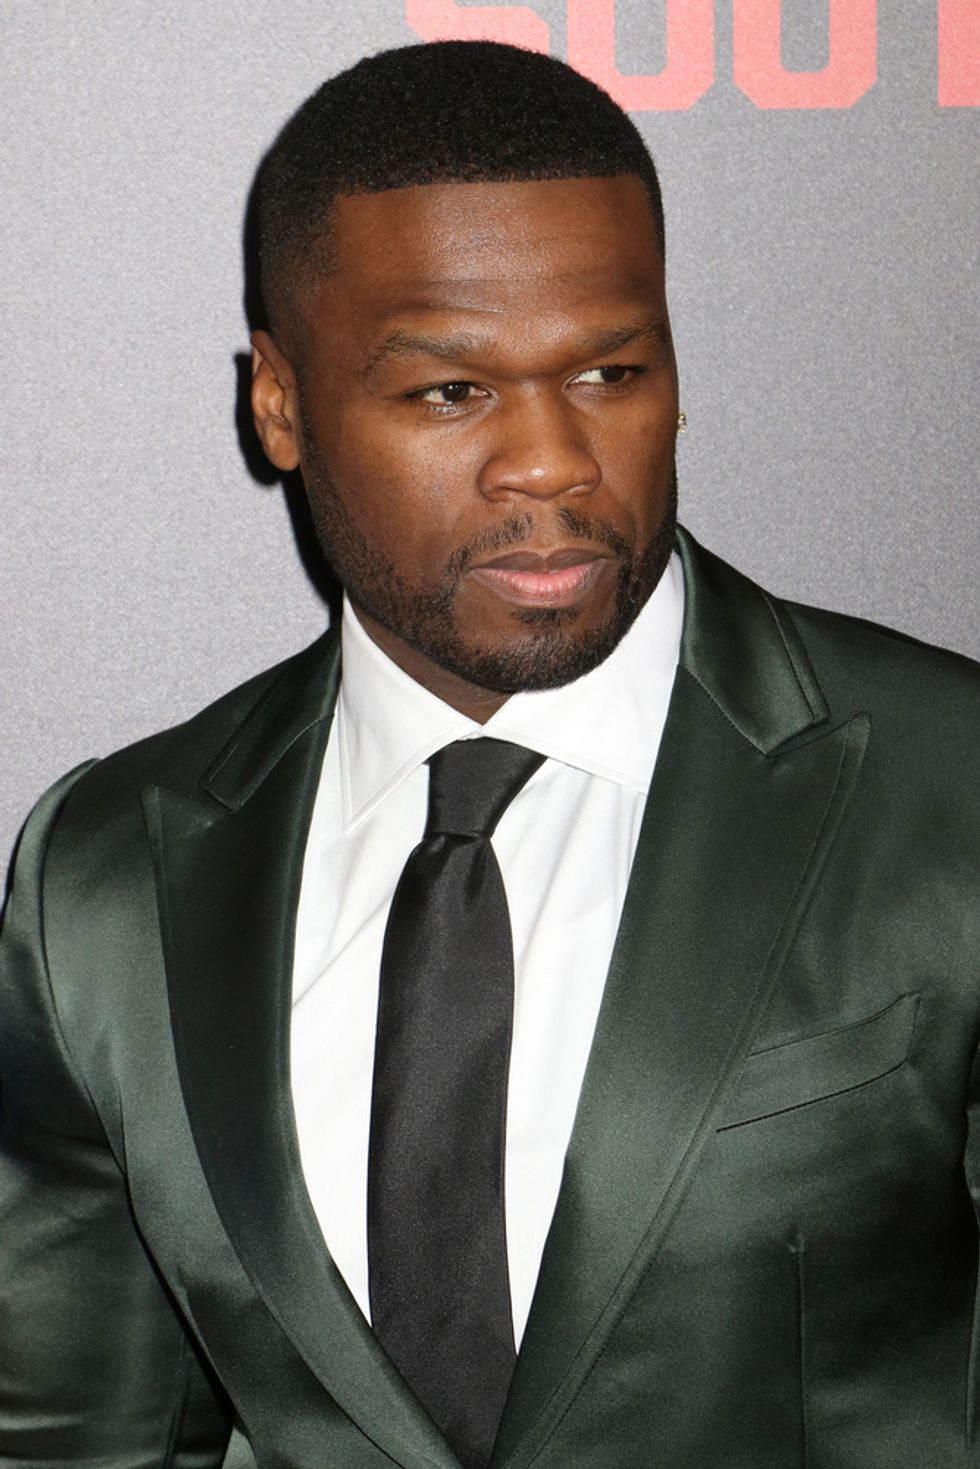 50 Cent Brutally Responds To Son Who Offered Him 6700 For His Time 0383